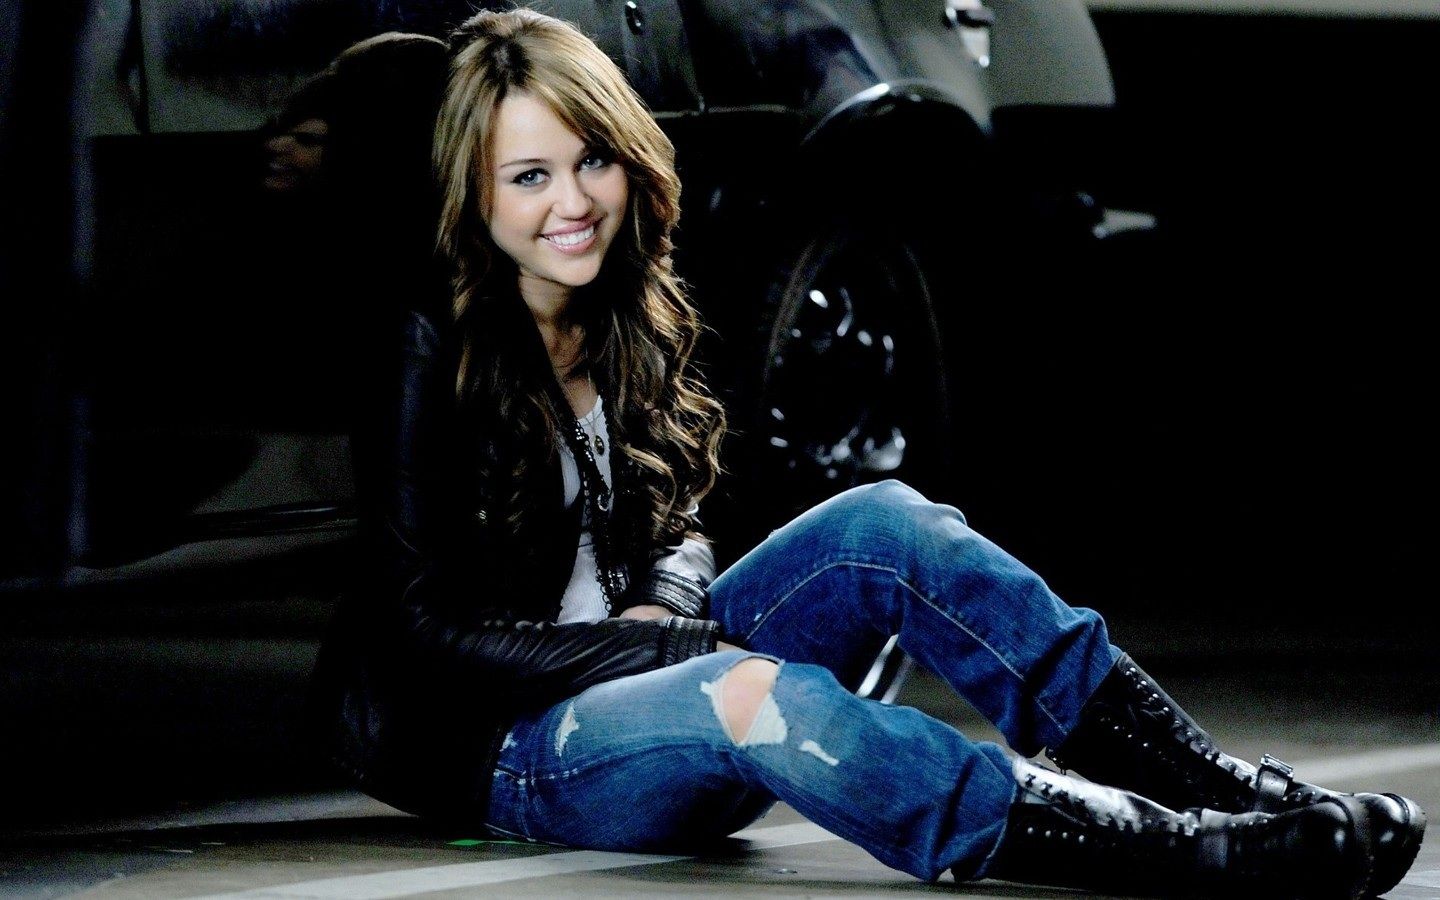 Miley's in cool jacket nd boots Cyrus Outfits Wallpaper